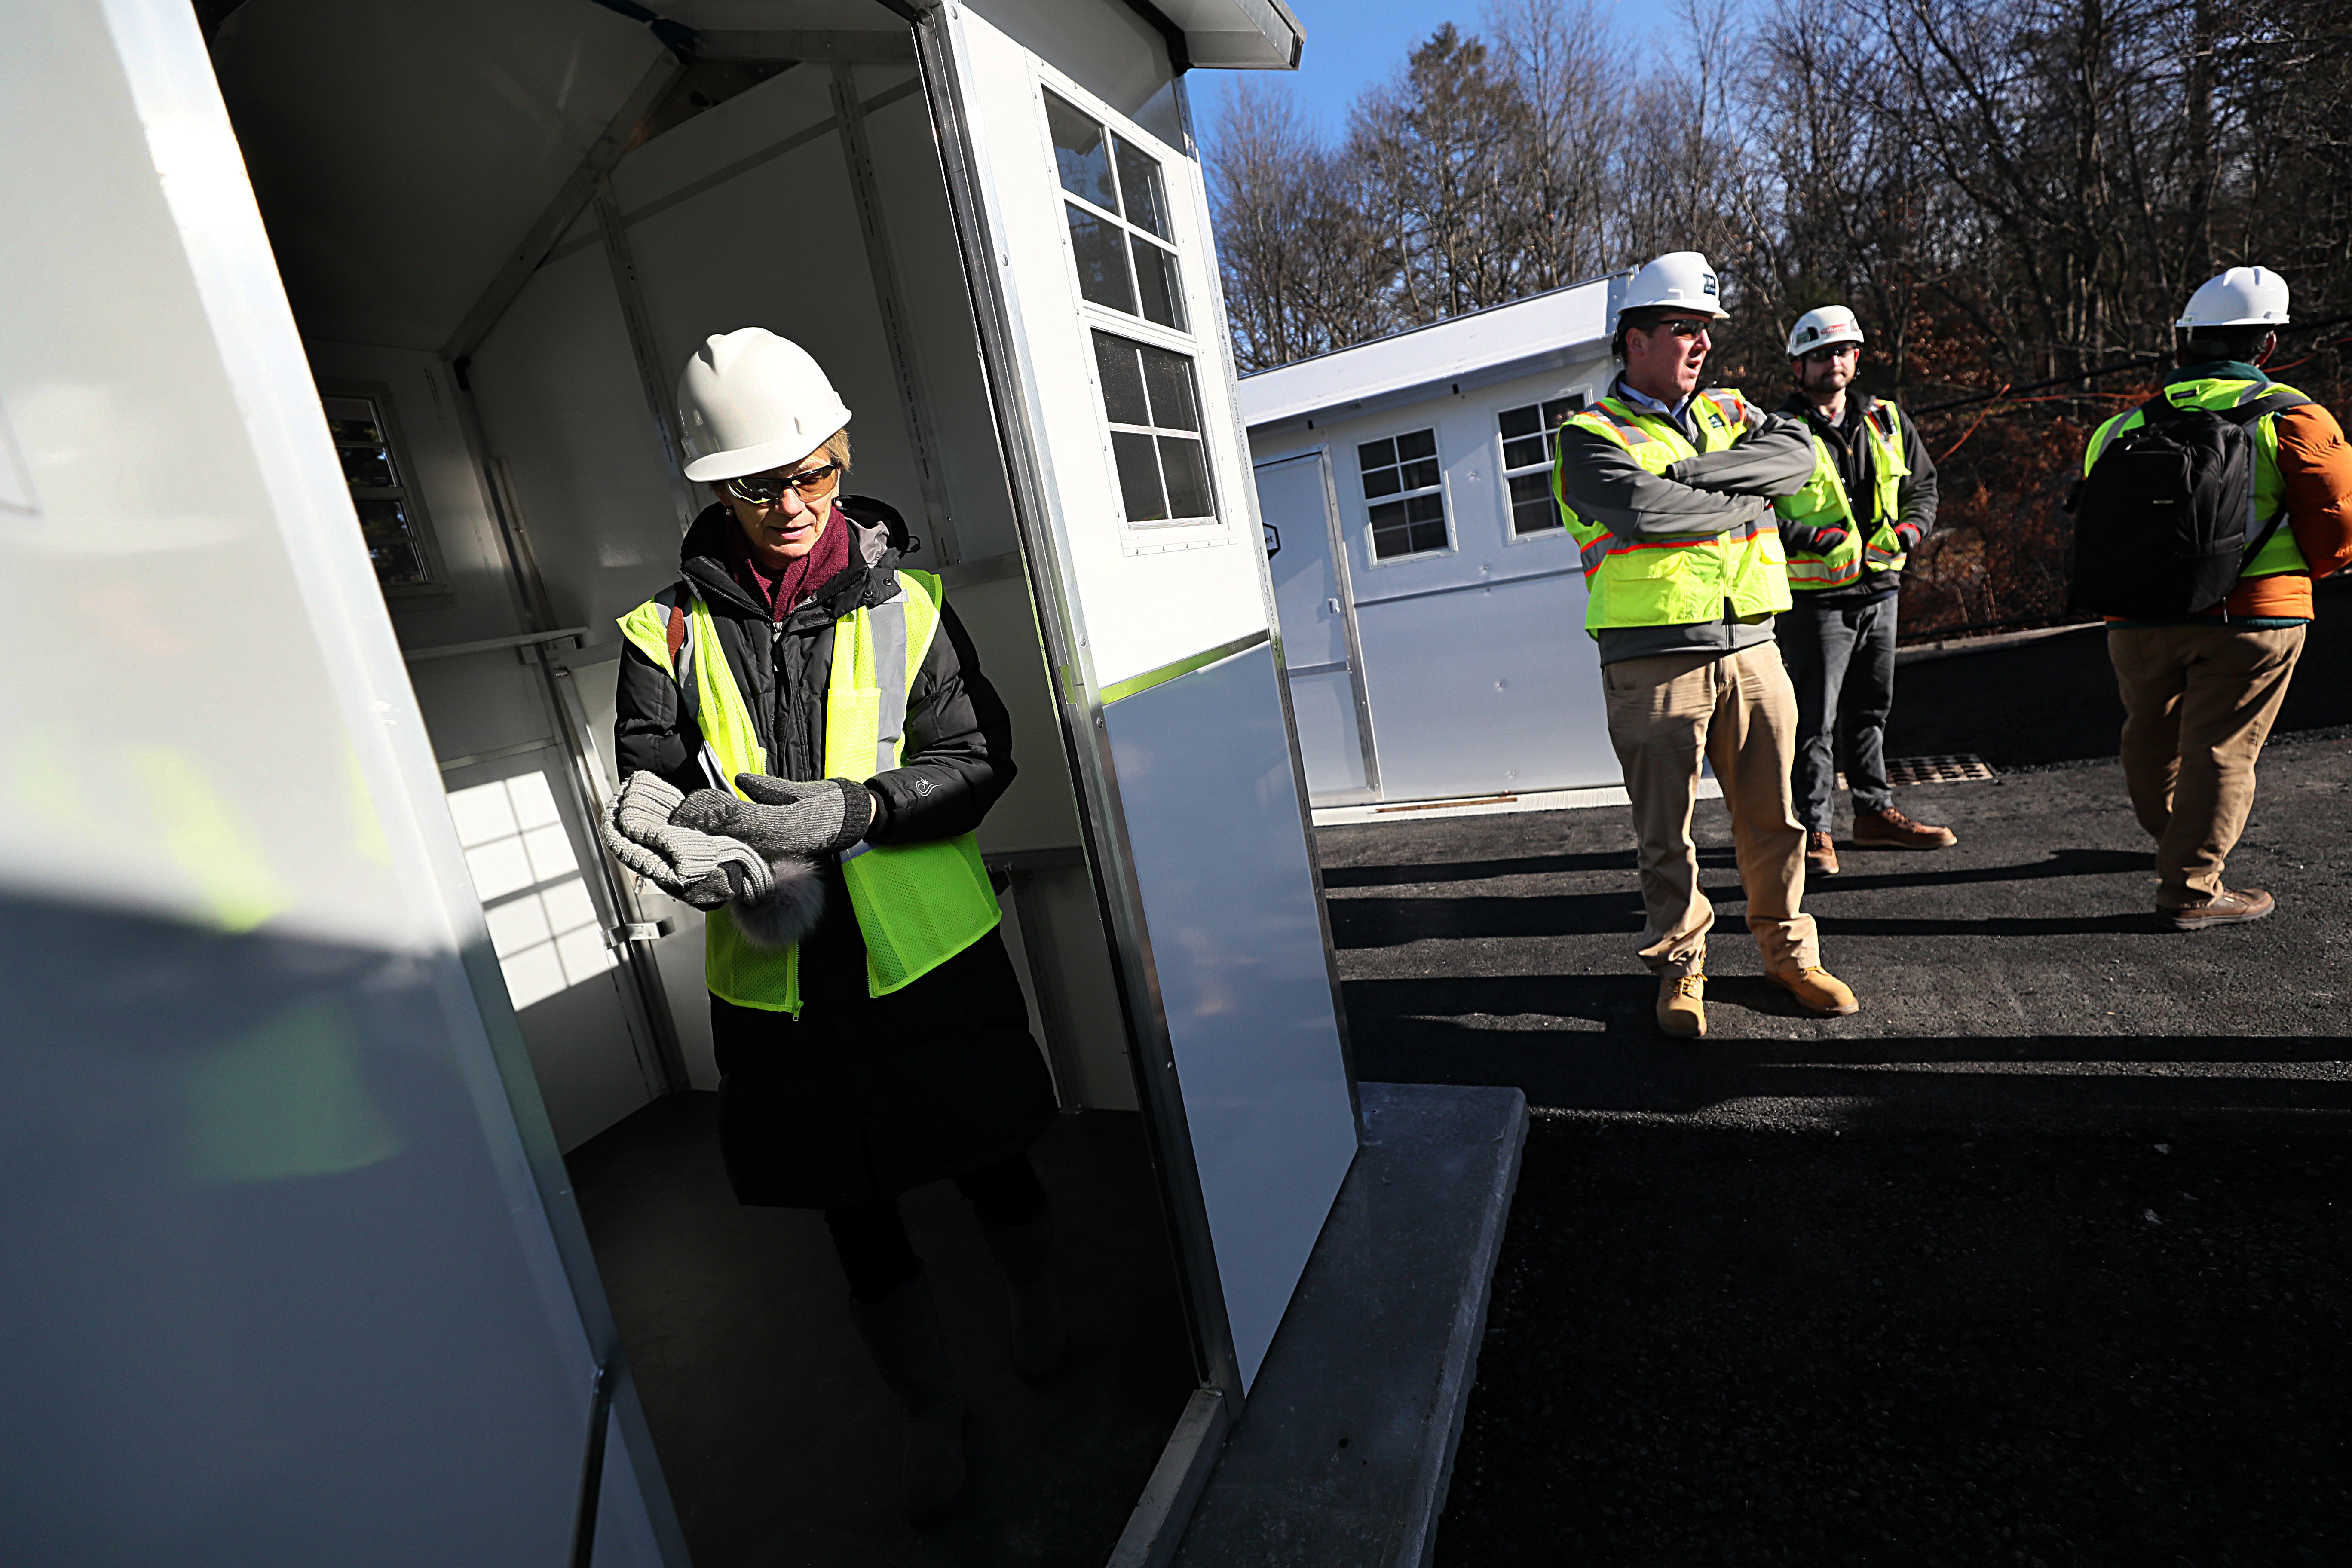 Massachusetts Secretary of Health and Human Services Marylou Sudders (left) and other state officials surveyed a 30-unit cottage community.